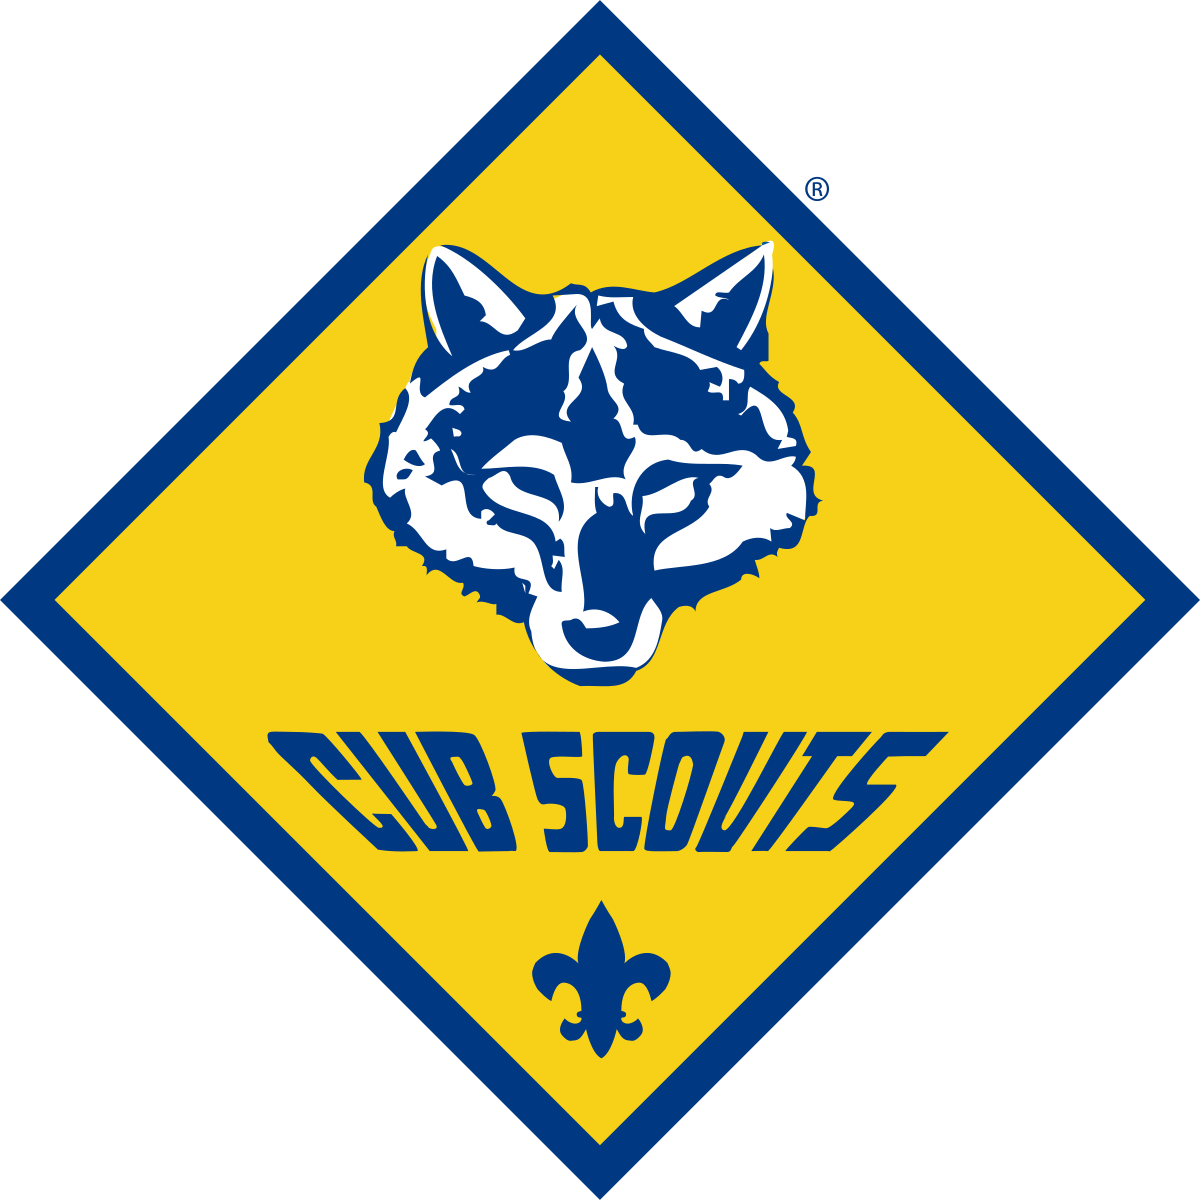 The Jaybots hosted an event for the Cub Scouts